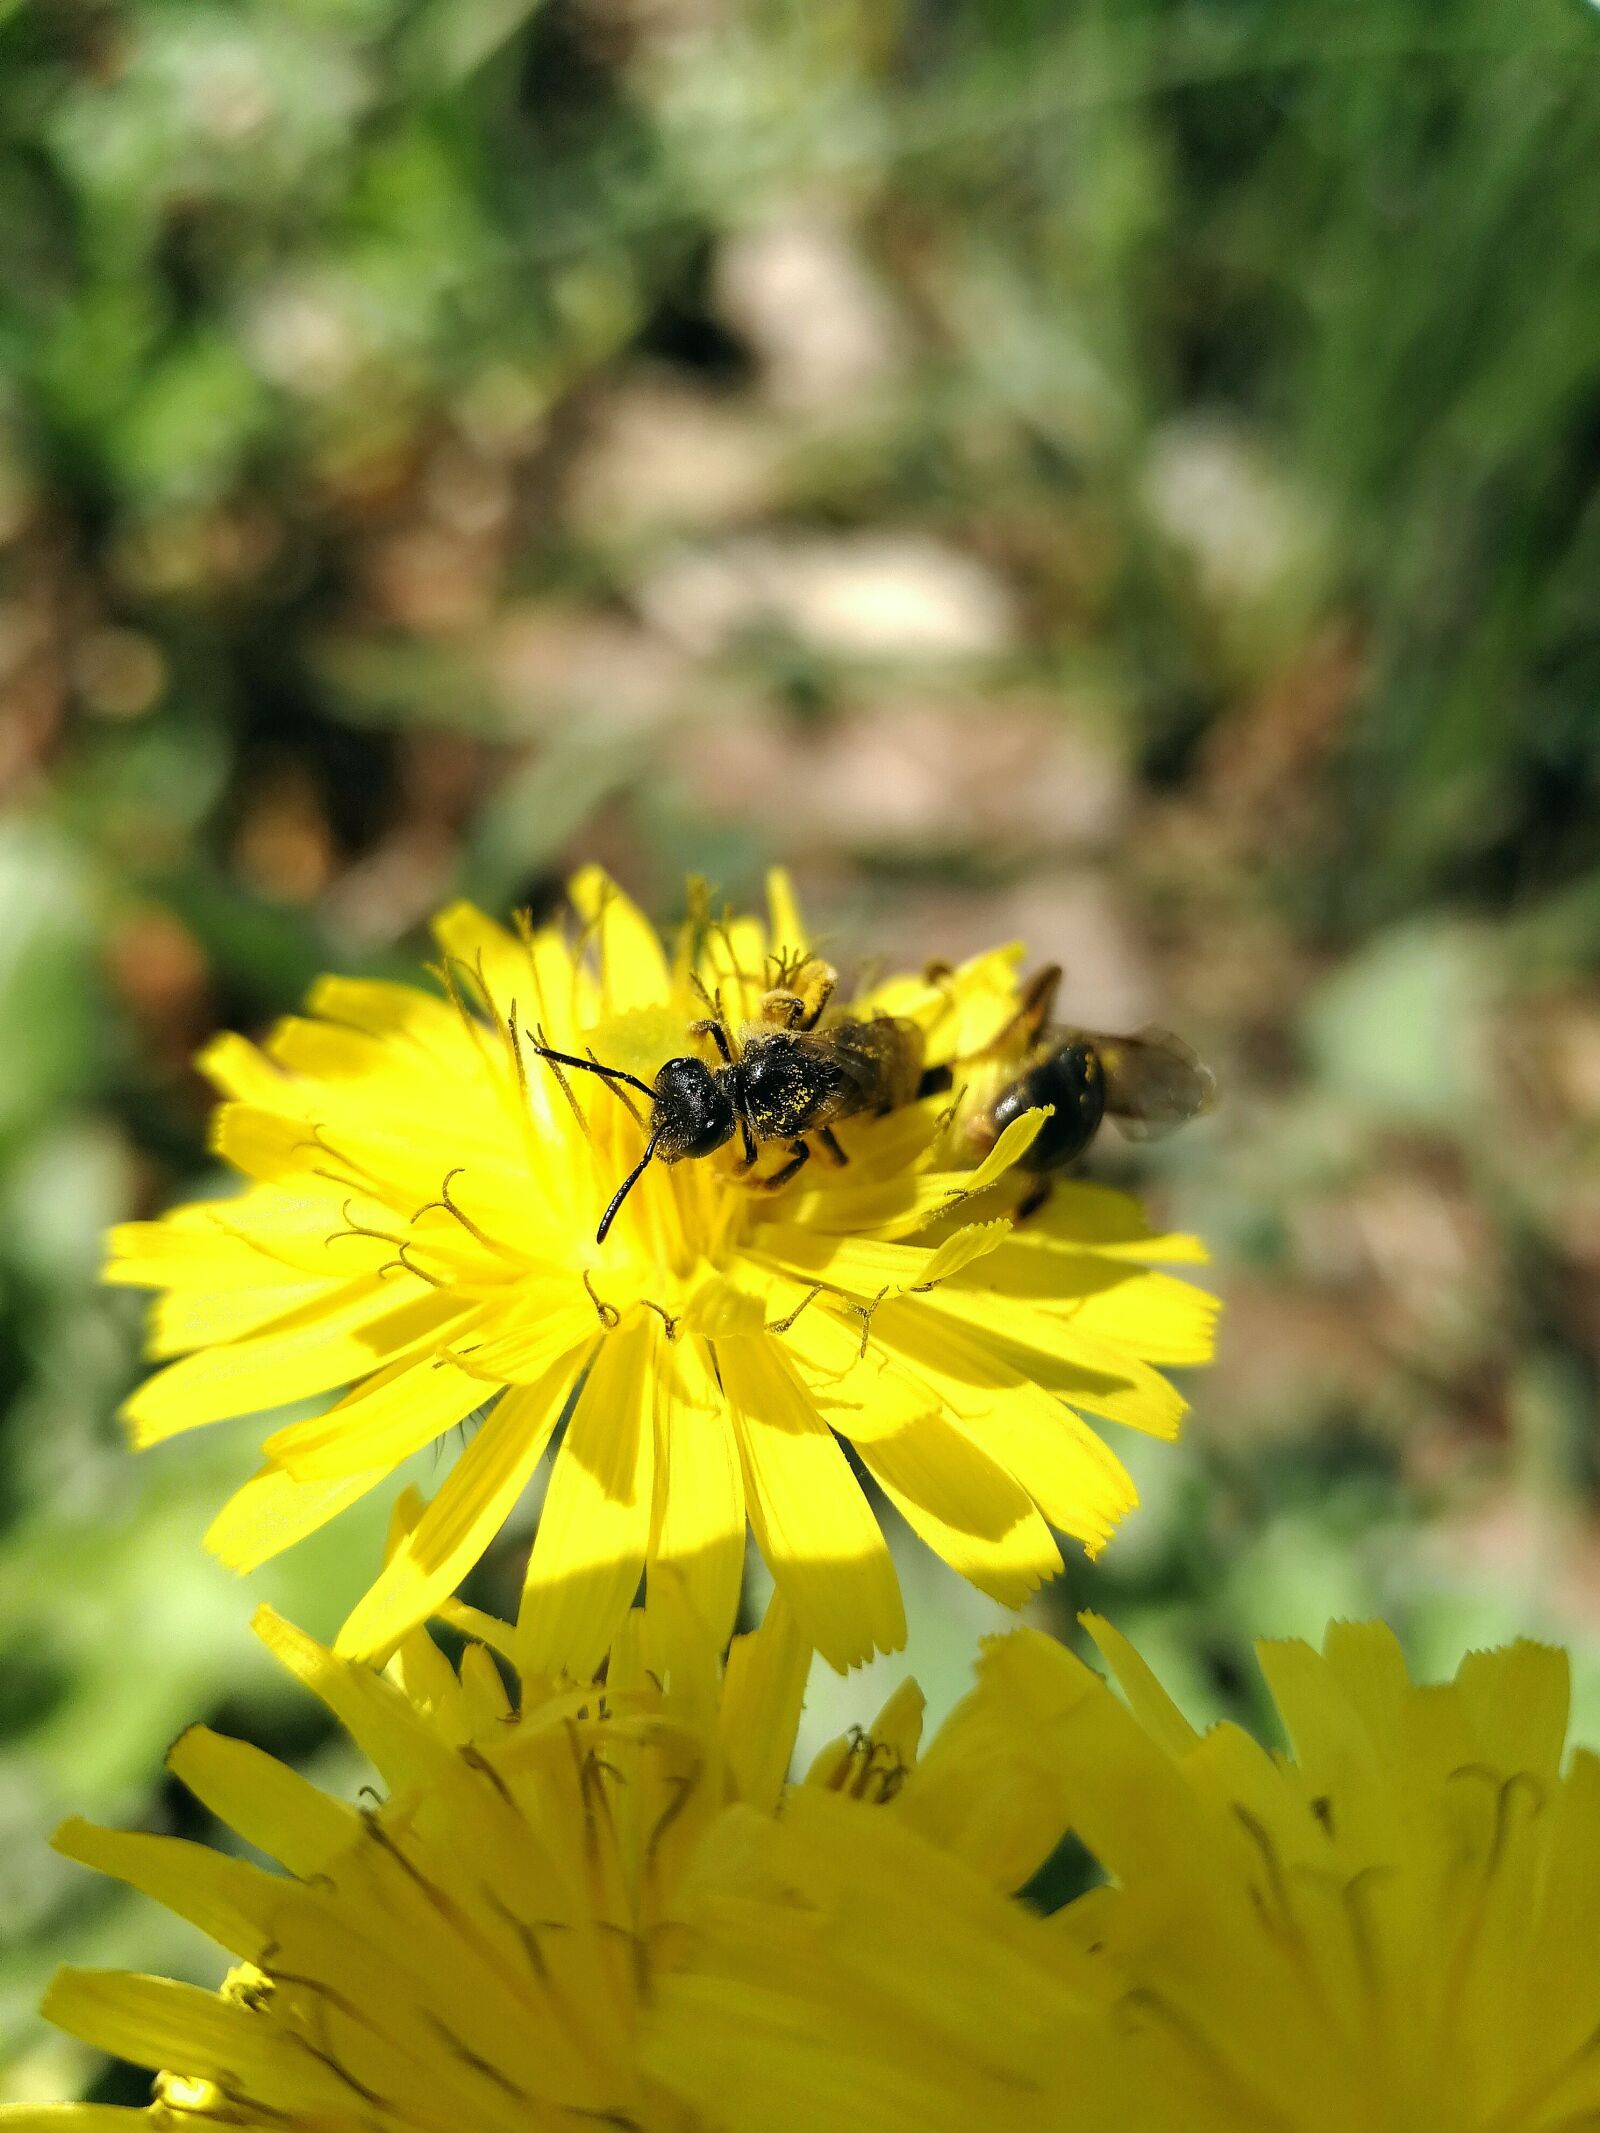 HUAWEI Mate 9 sample photo. Spring, bee, nature photography